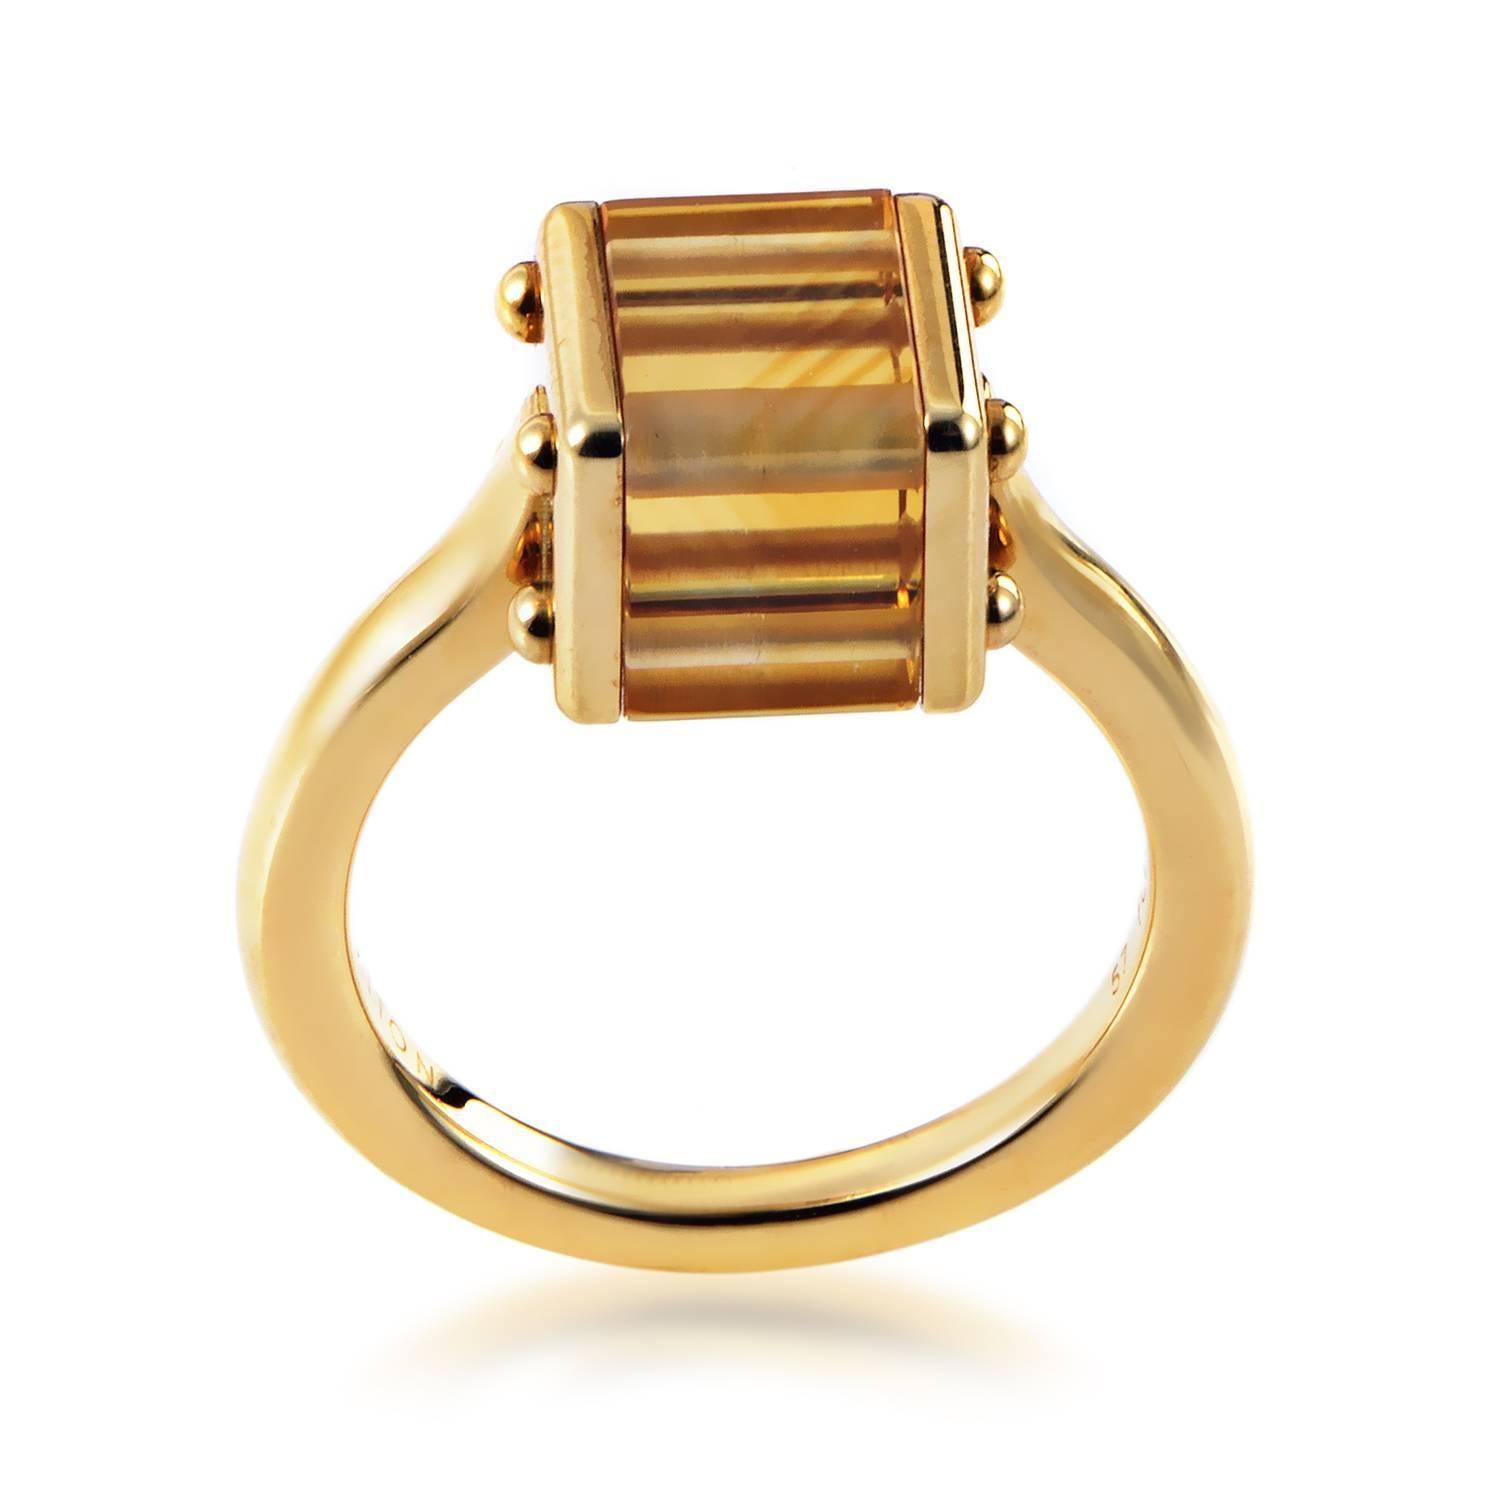 Boasting the compelling citrine stone of delightful translucence and warm captivating depth in a neat rectangular shape, this astonishing ring from Louis Vuitton is made of wonderful 18K yellow gold for a harmonious overall tone.
Ring Size: 9.0